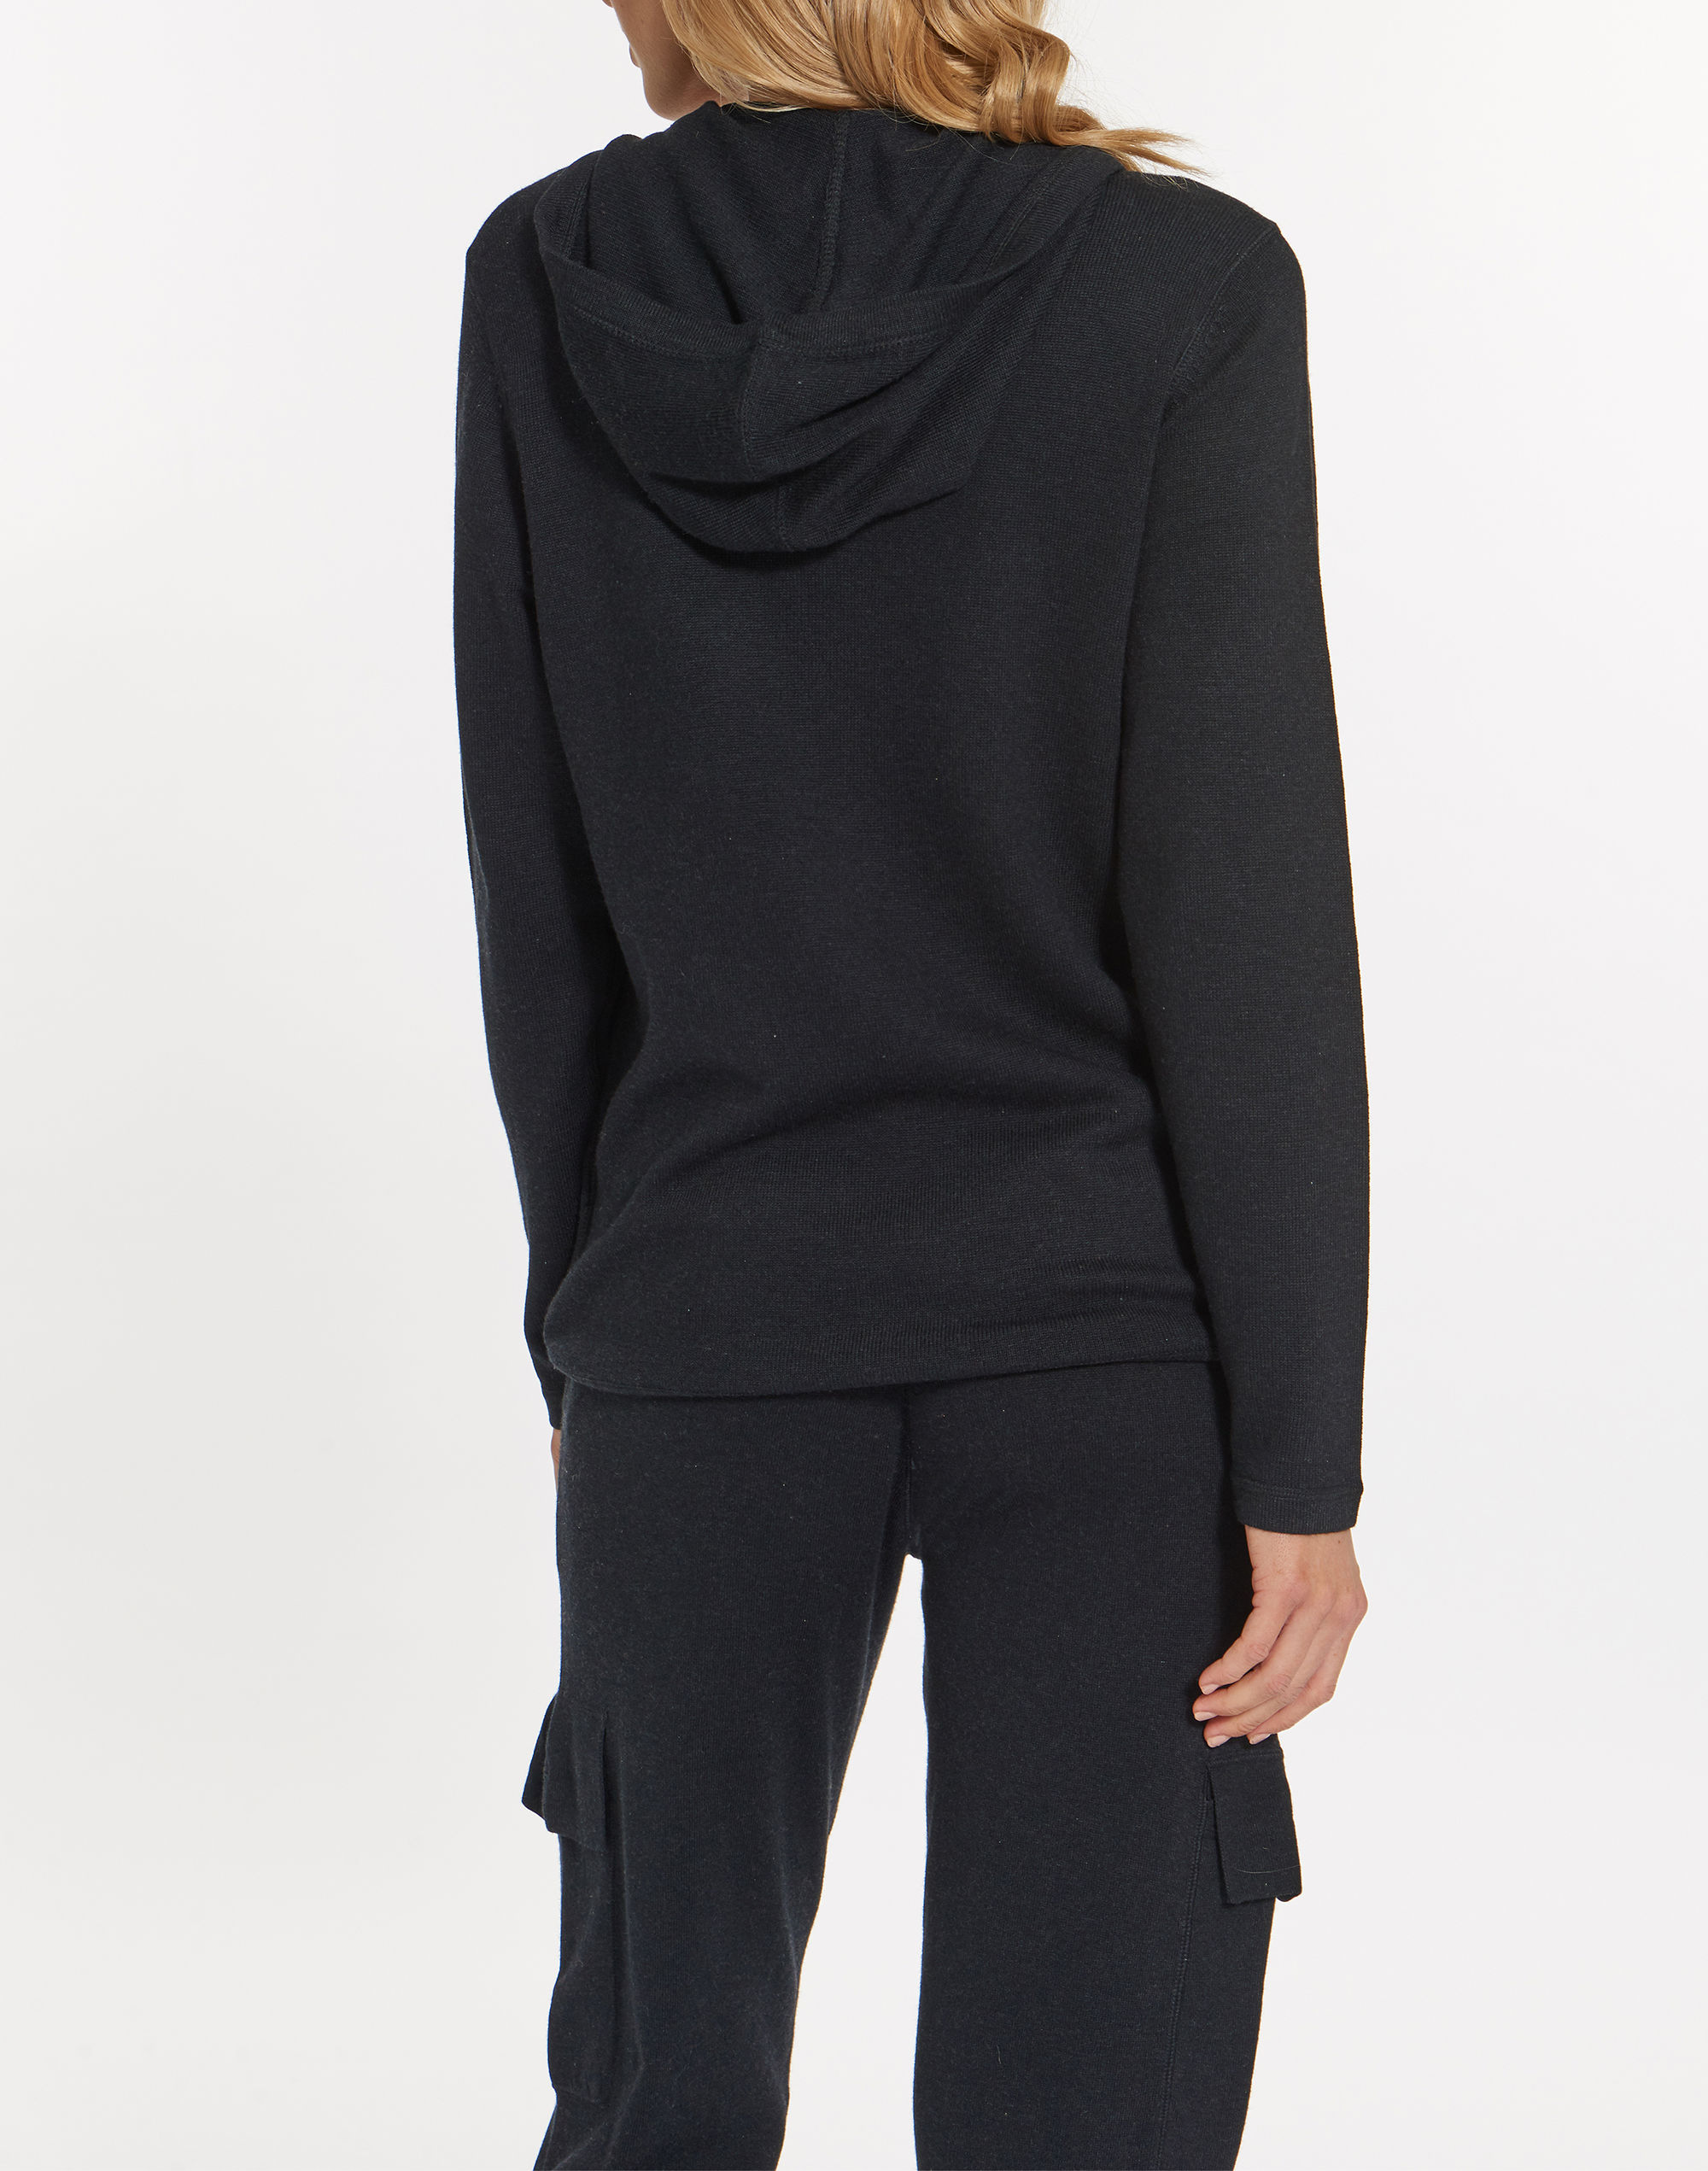 LEIMERE Bowery Half Zip Pullover